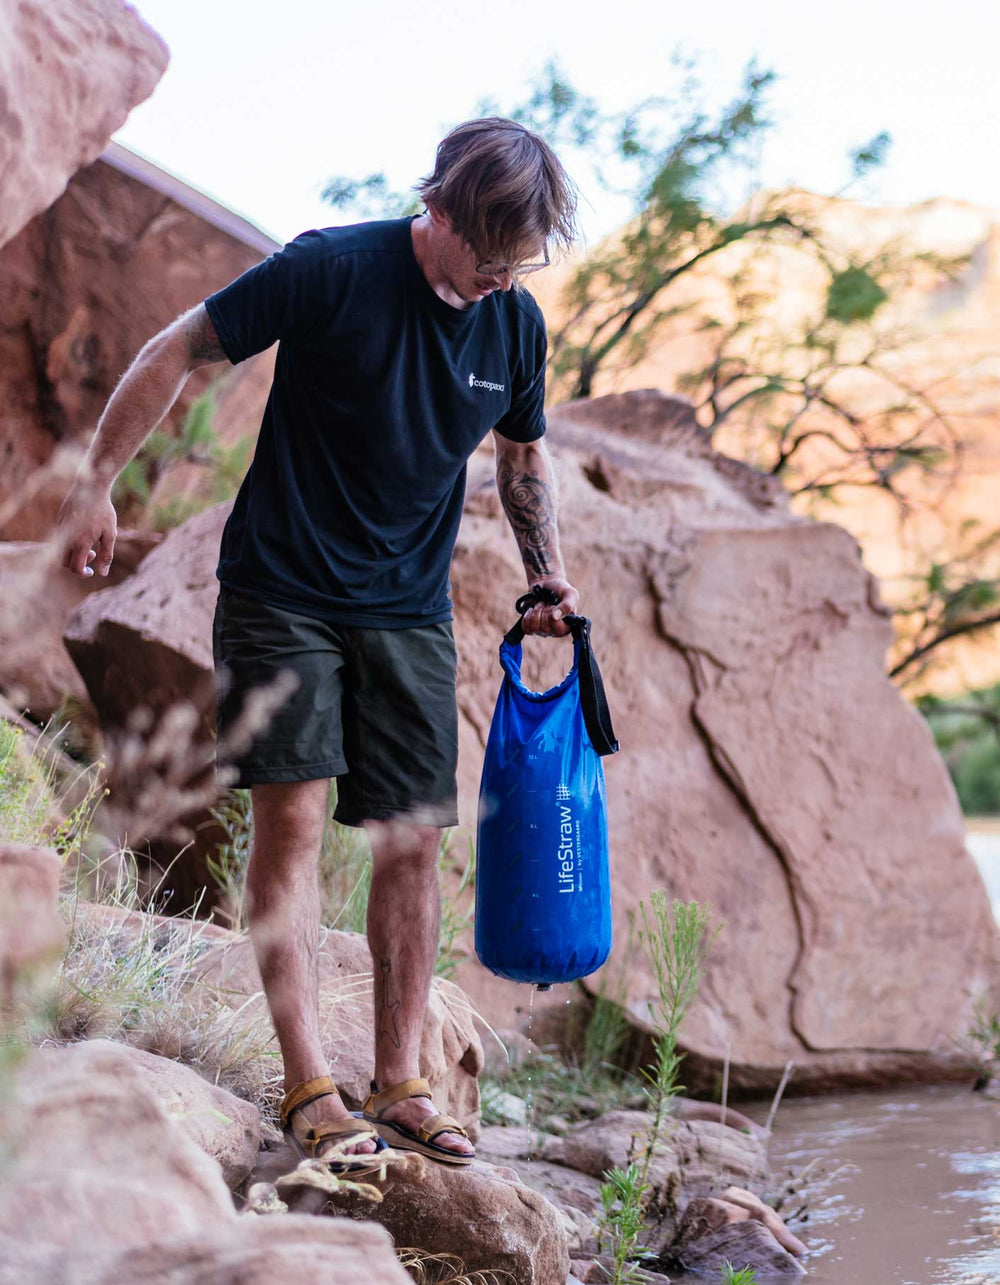 Life Straw - Tactical Evolution Group